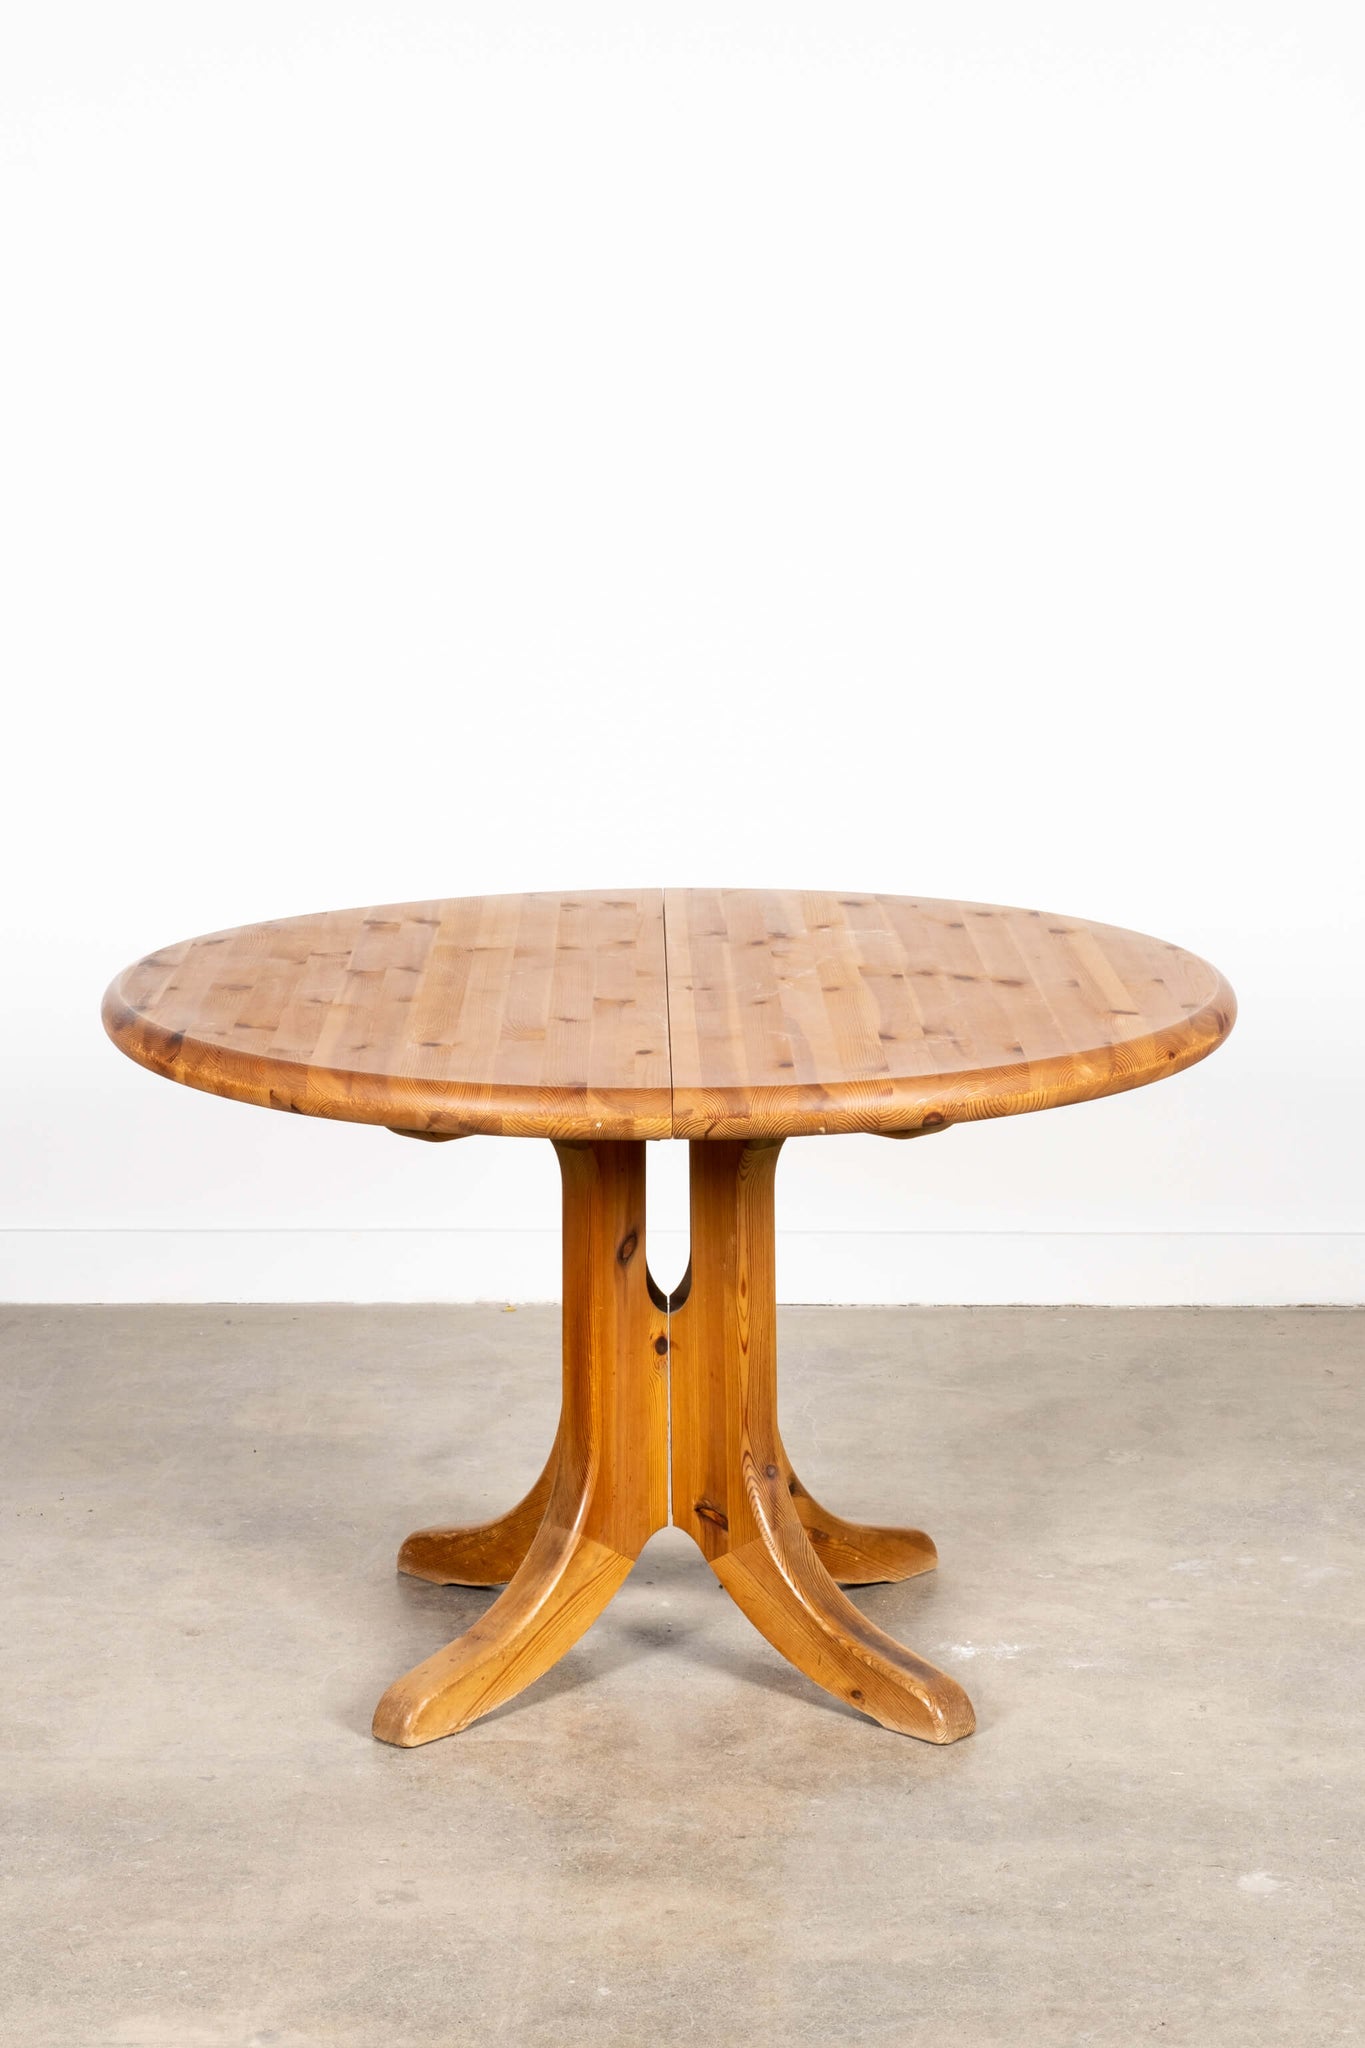 Vintage 1970s Solid Pine Extendable Dining Table, shown without leaves